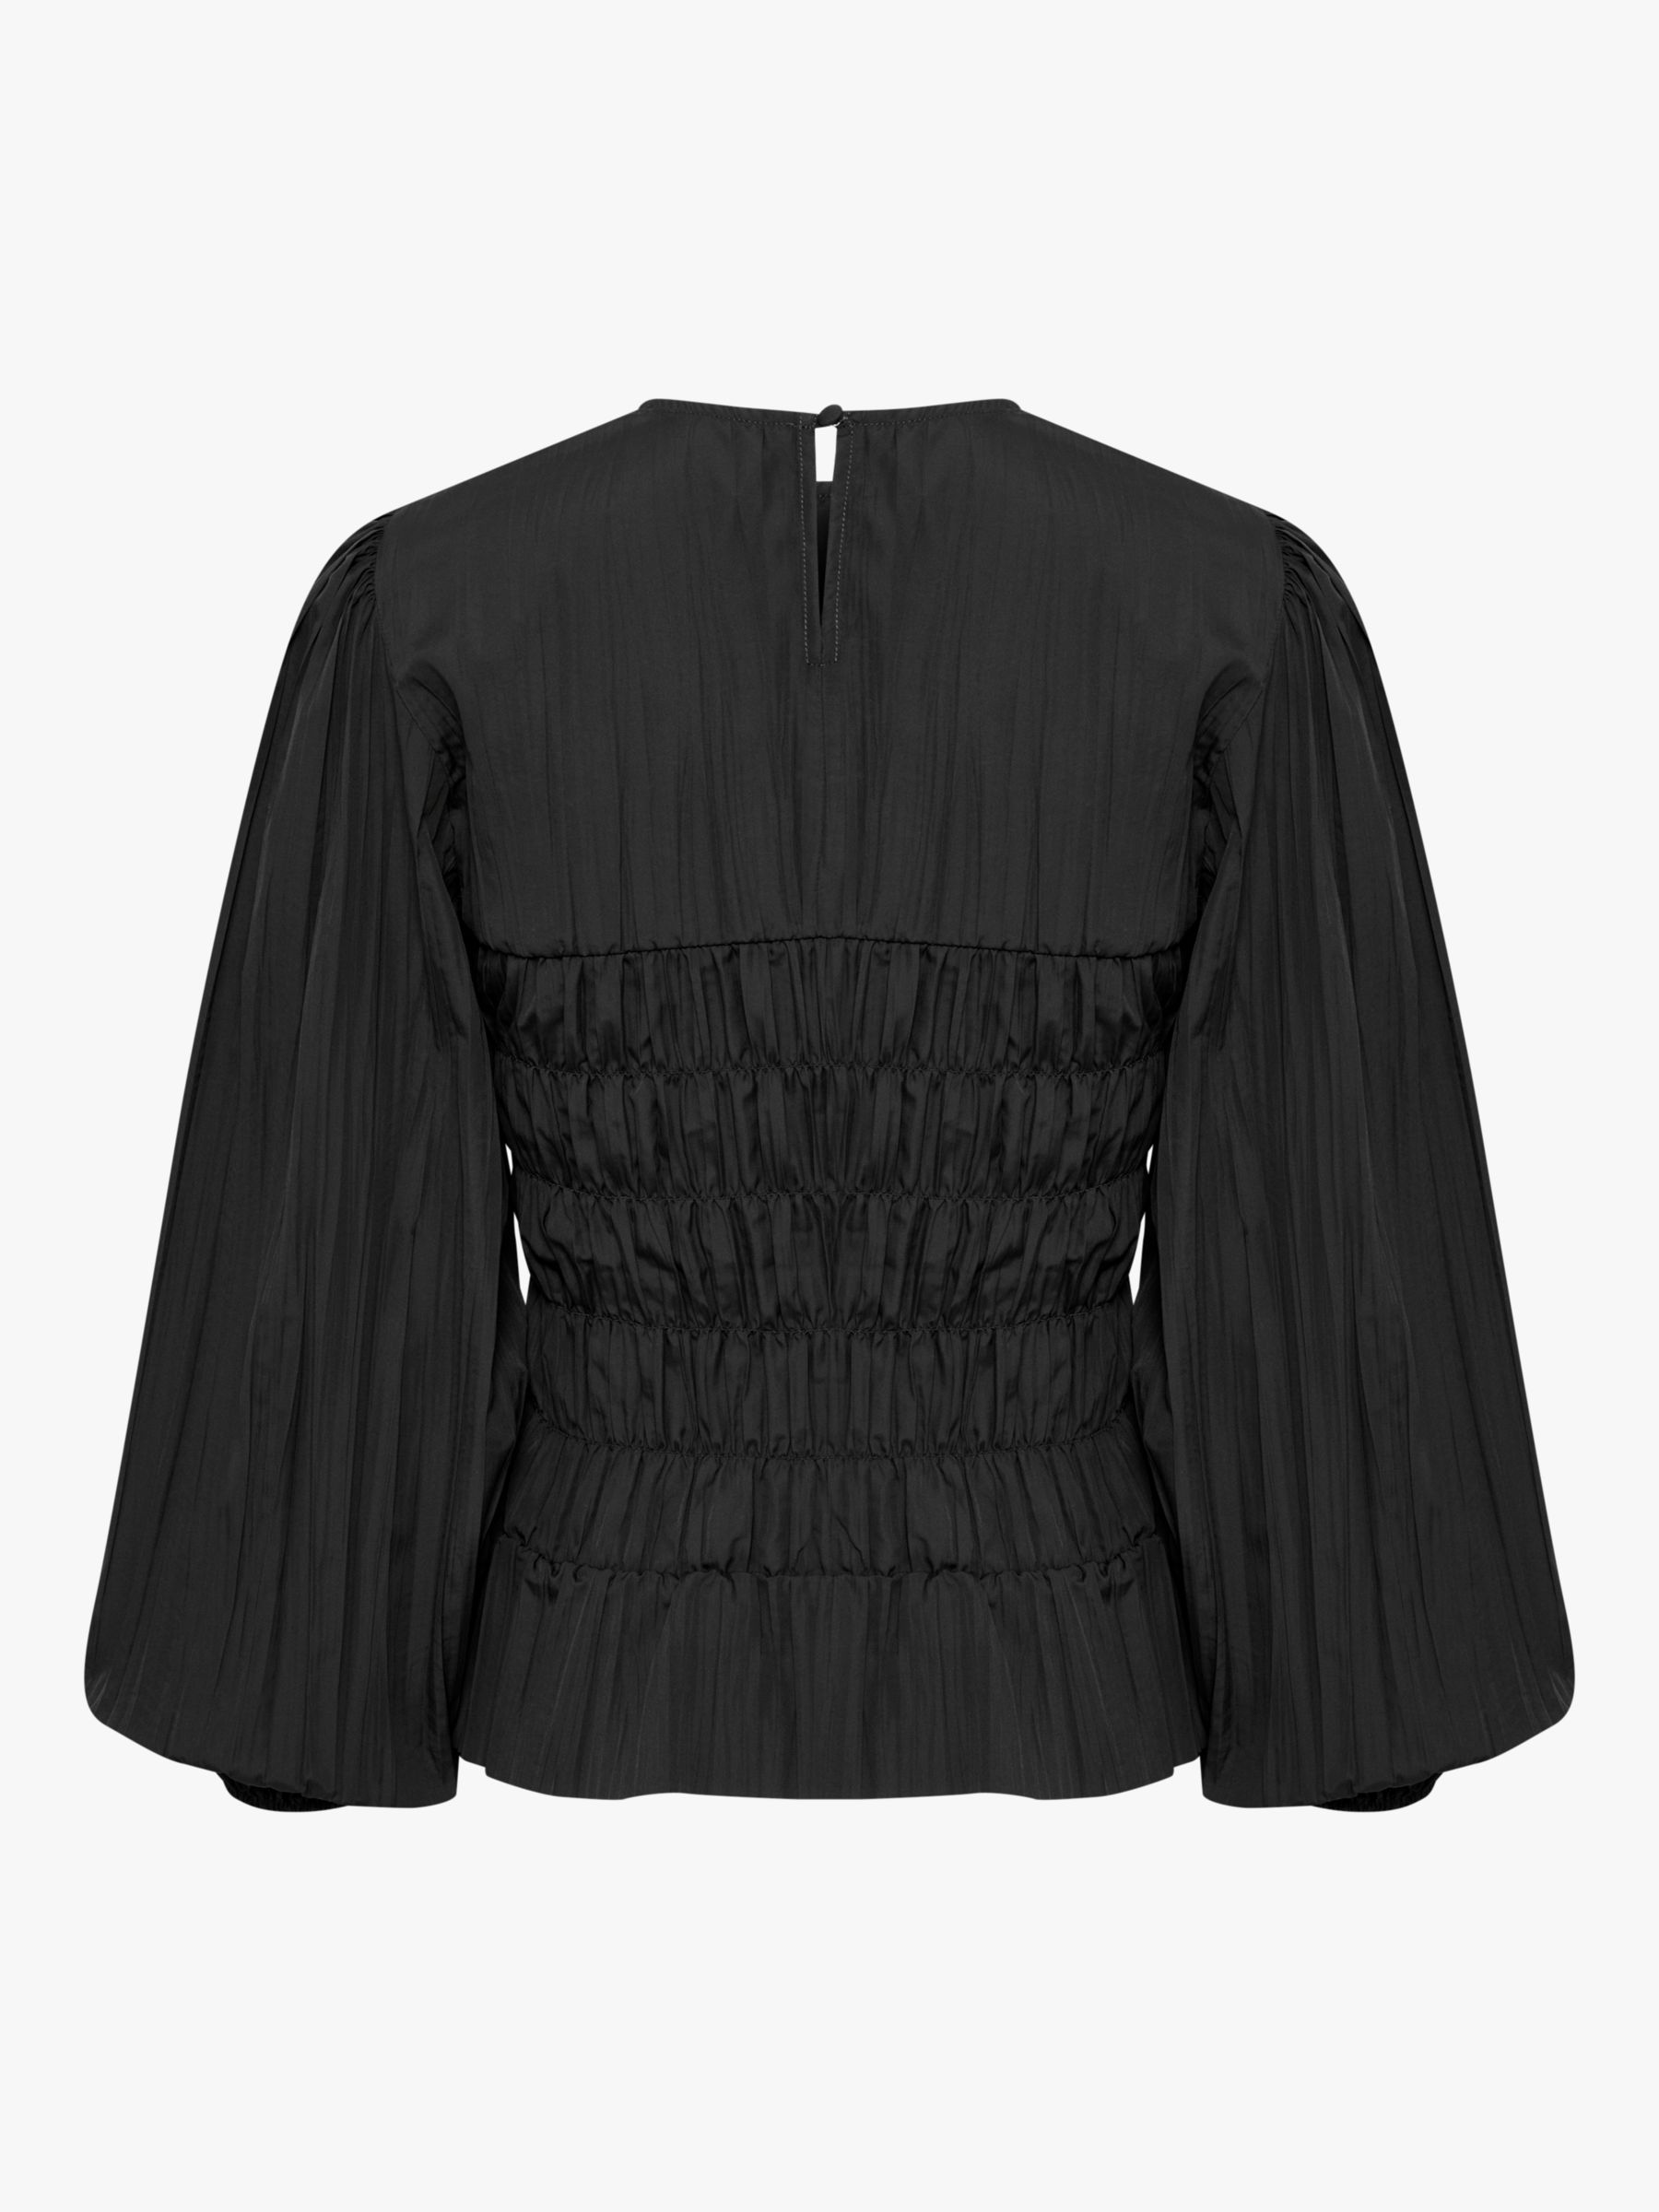 Buy InWear Kitra Gathered Fitted Balloon Sleeve Blouse, Black Online at johnlewis.com